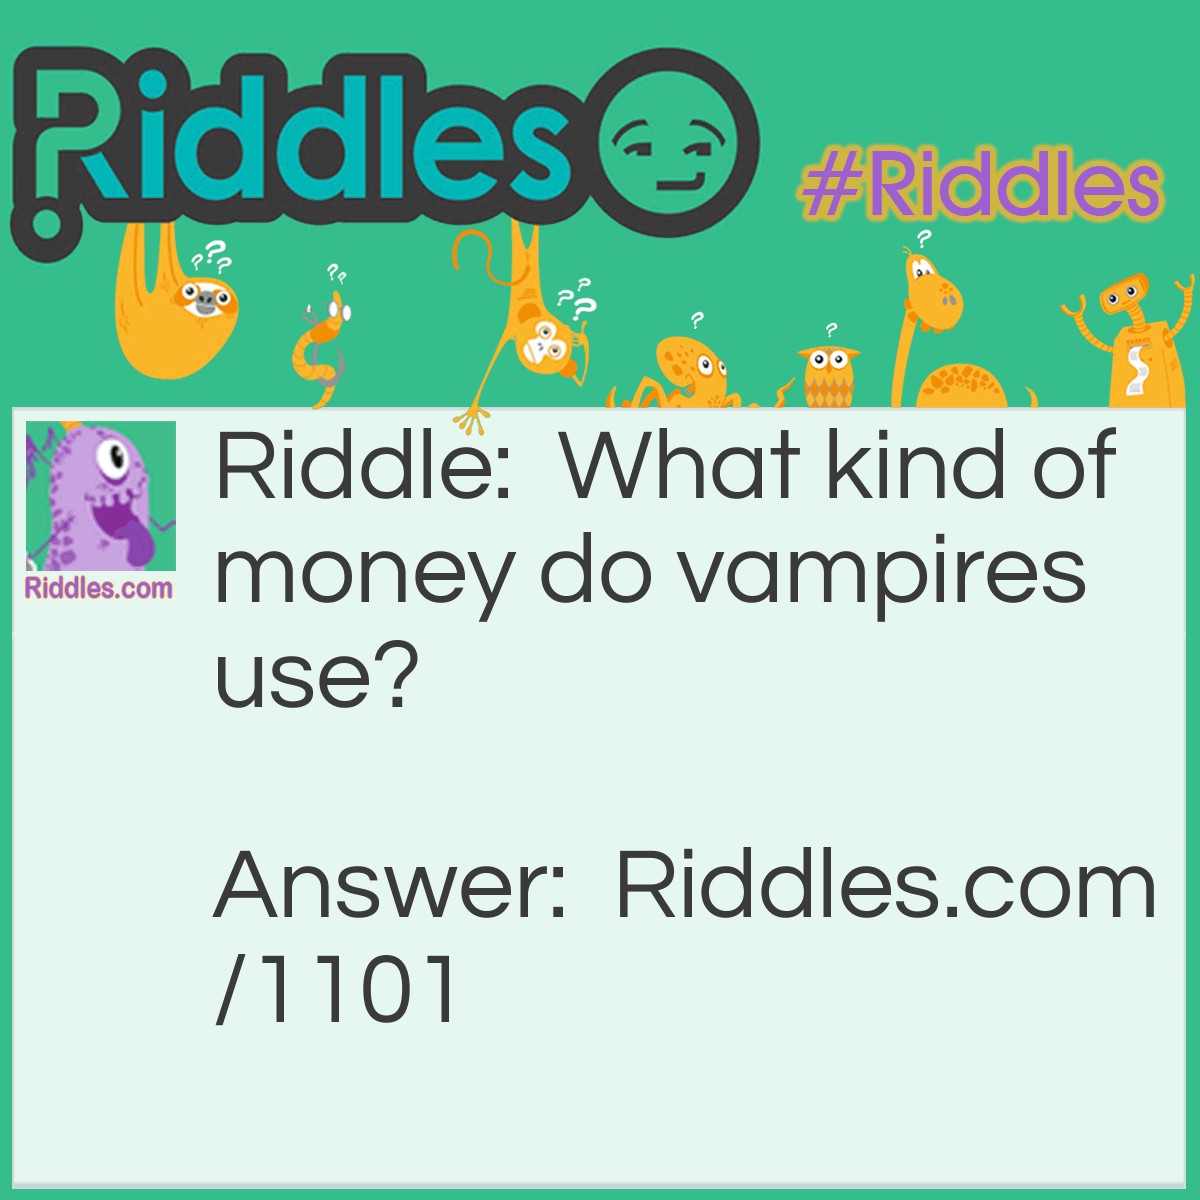 Riddle: What kind of money do vampires use? Answer: Blood money!